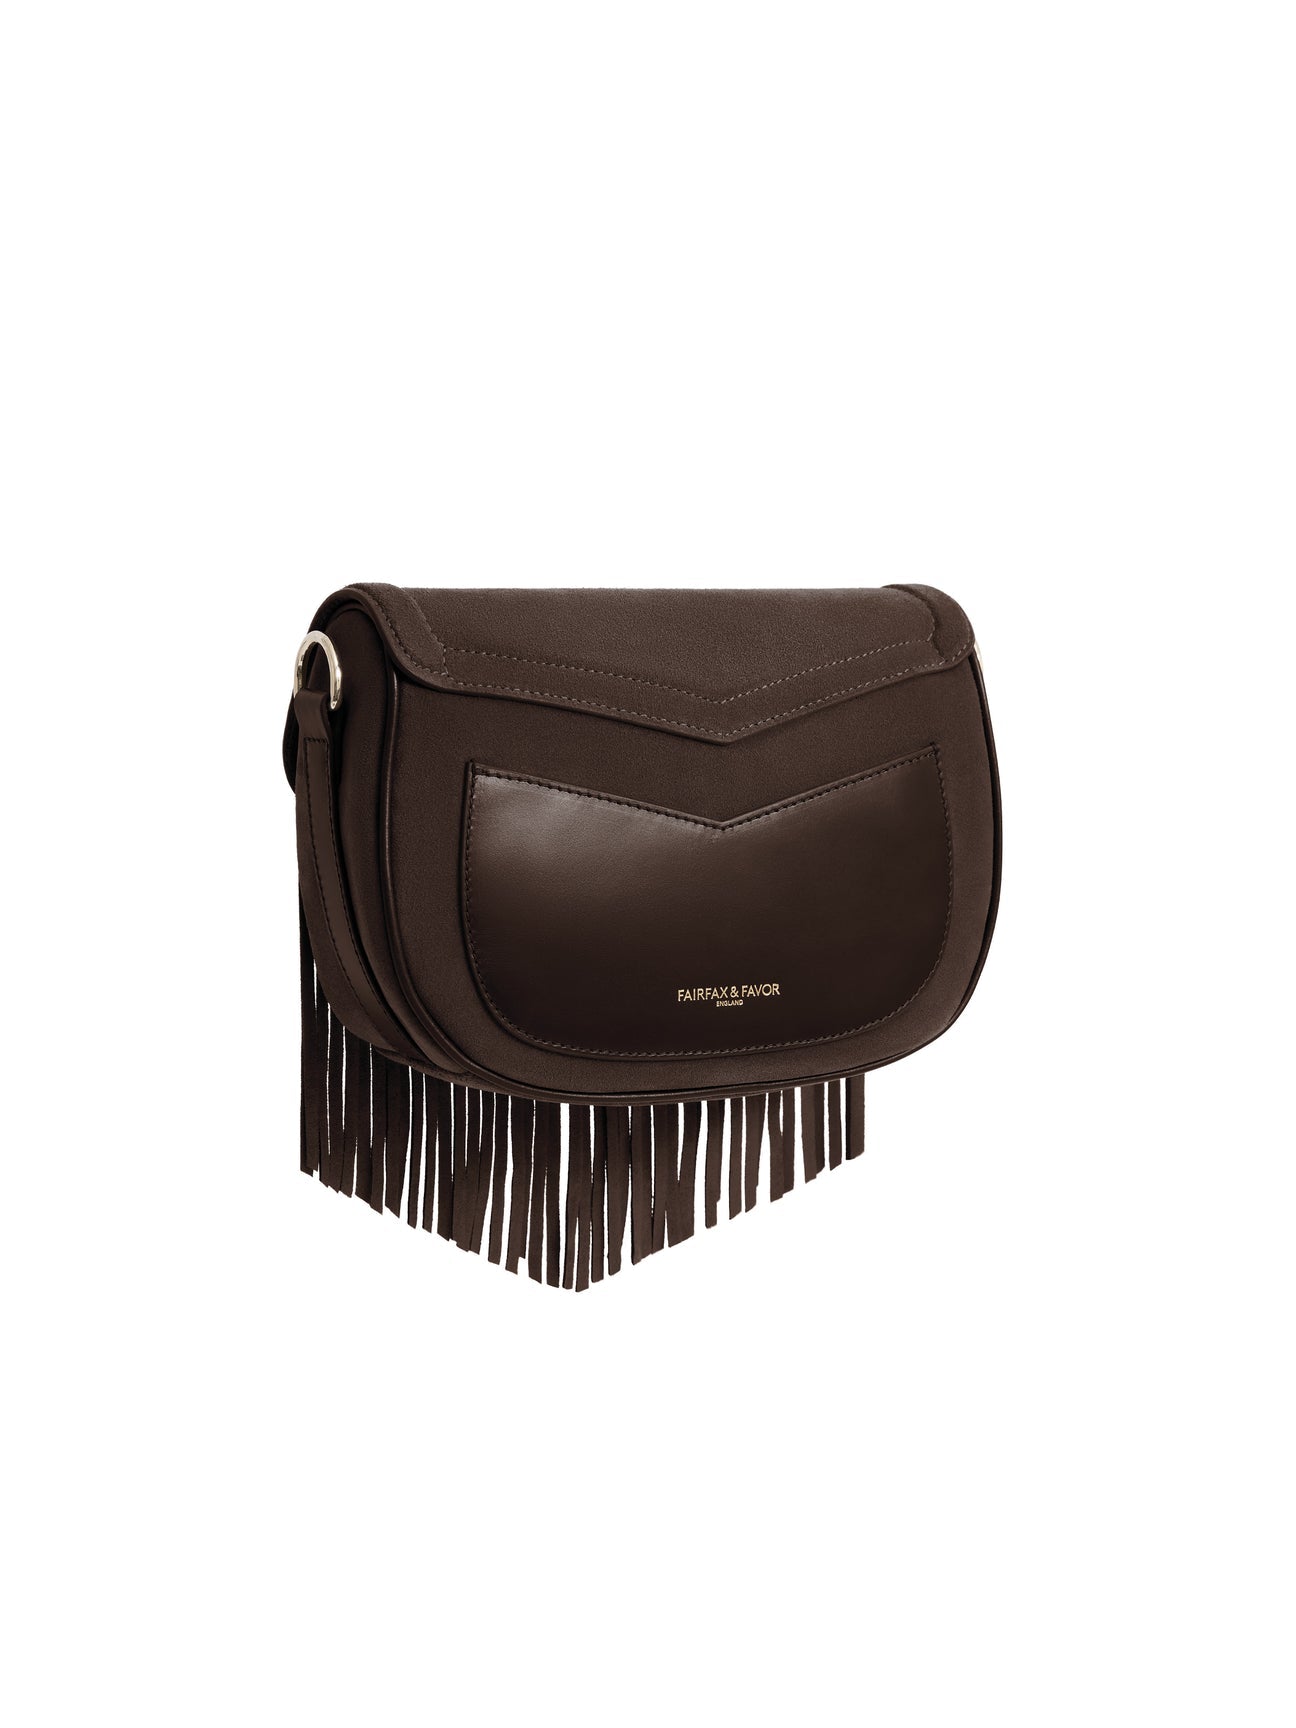 The Nashville
Women's Bag - Fringed Chocolate Suede